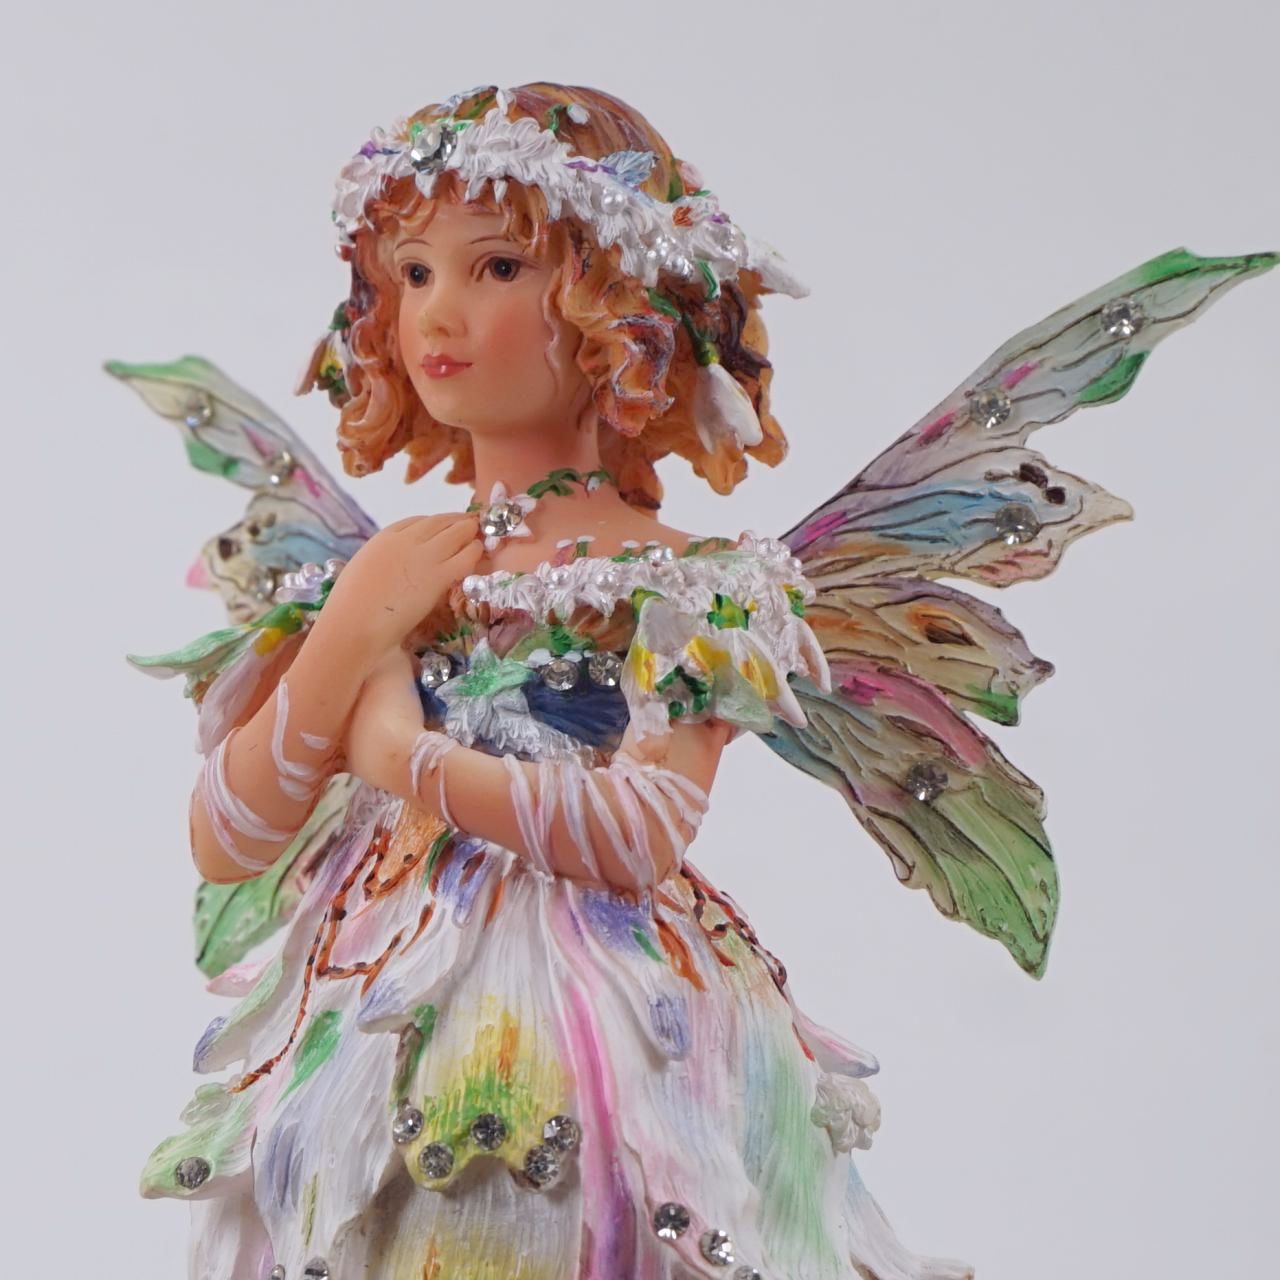 Crisalis Collection★ Early Snowdrop Faerie (1-1125) 20% OFF